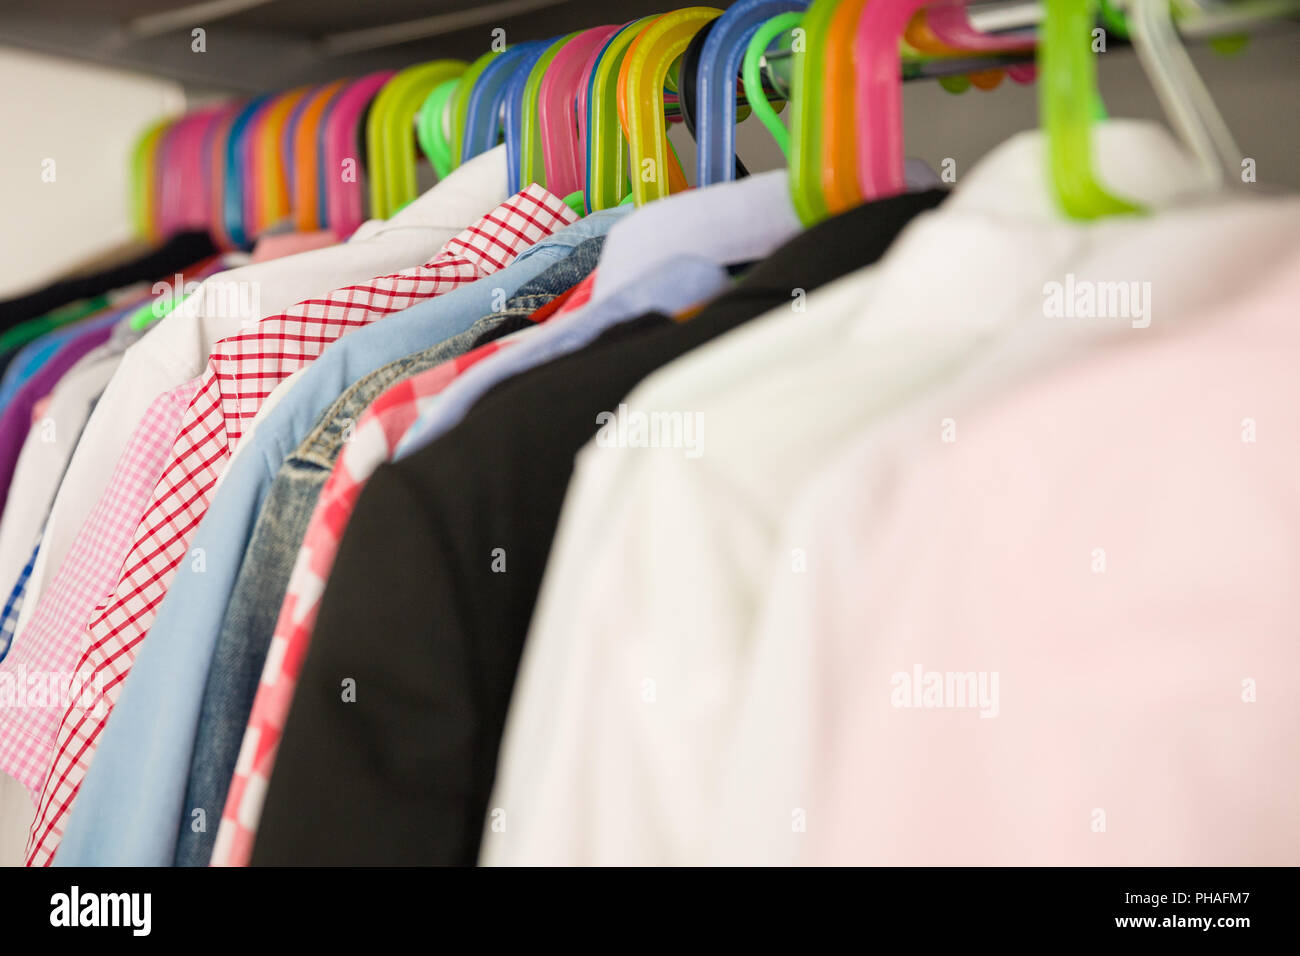 Children clothes on hangers in a room. wardrobe with boy's clothes on hangers. Shopping and consumerism concept. Dressing closet with clothes arranged Stock Photo